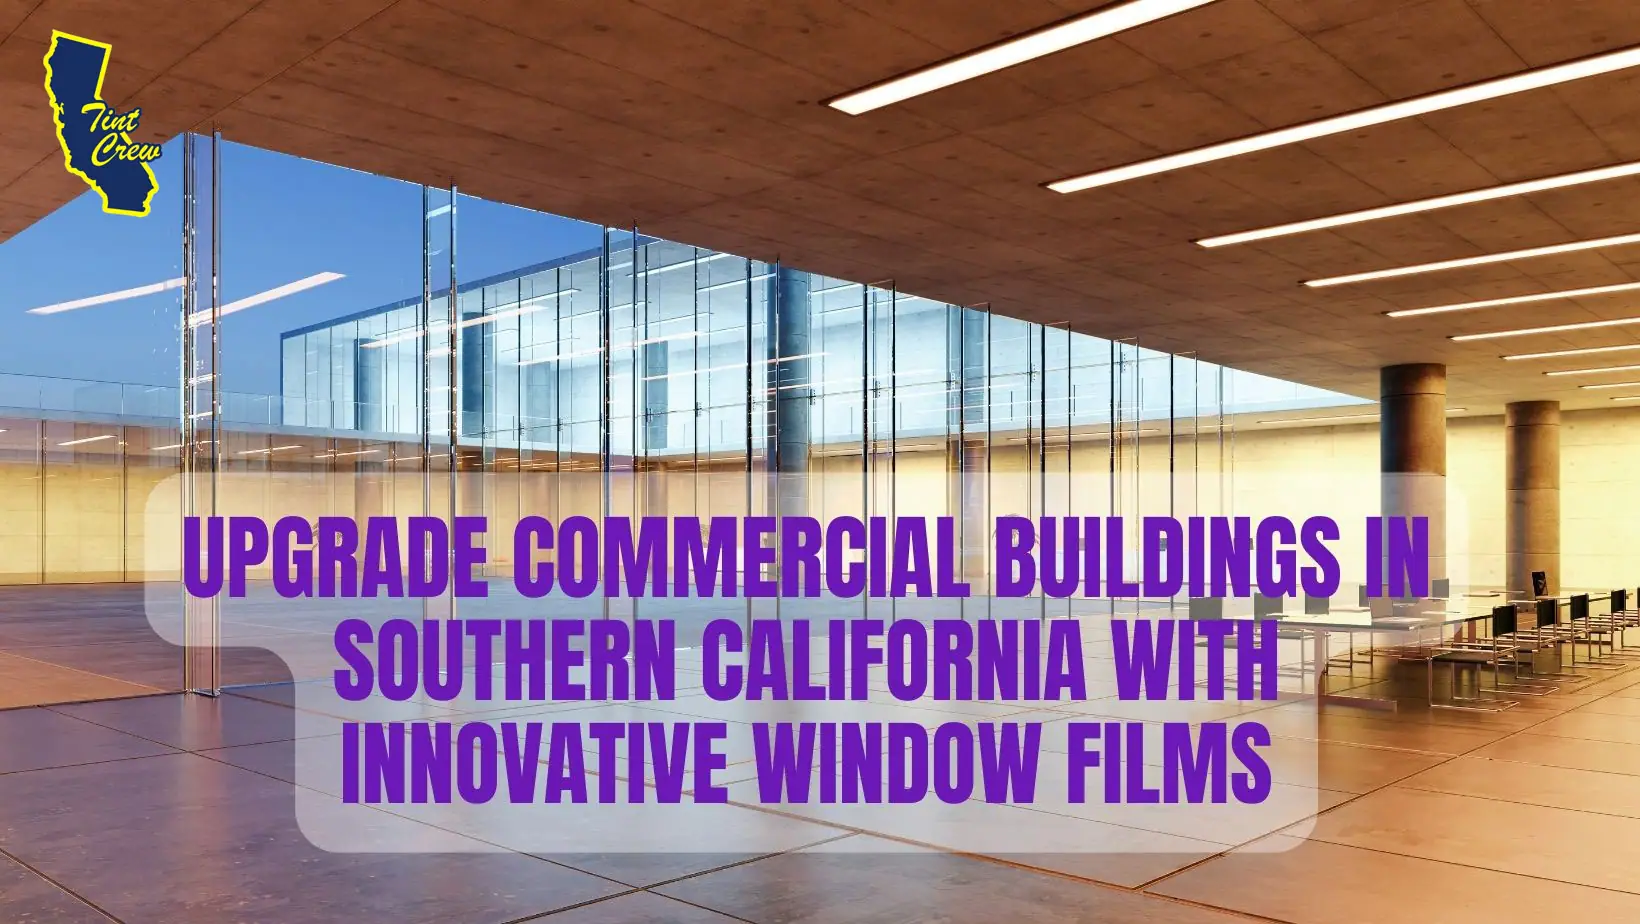 Upgrade Commercial Buildings in Southern California with Innovative Window Films